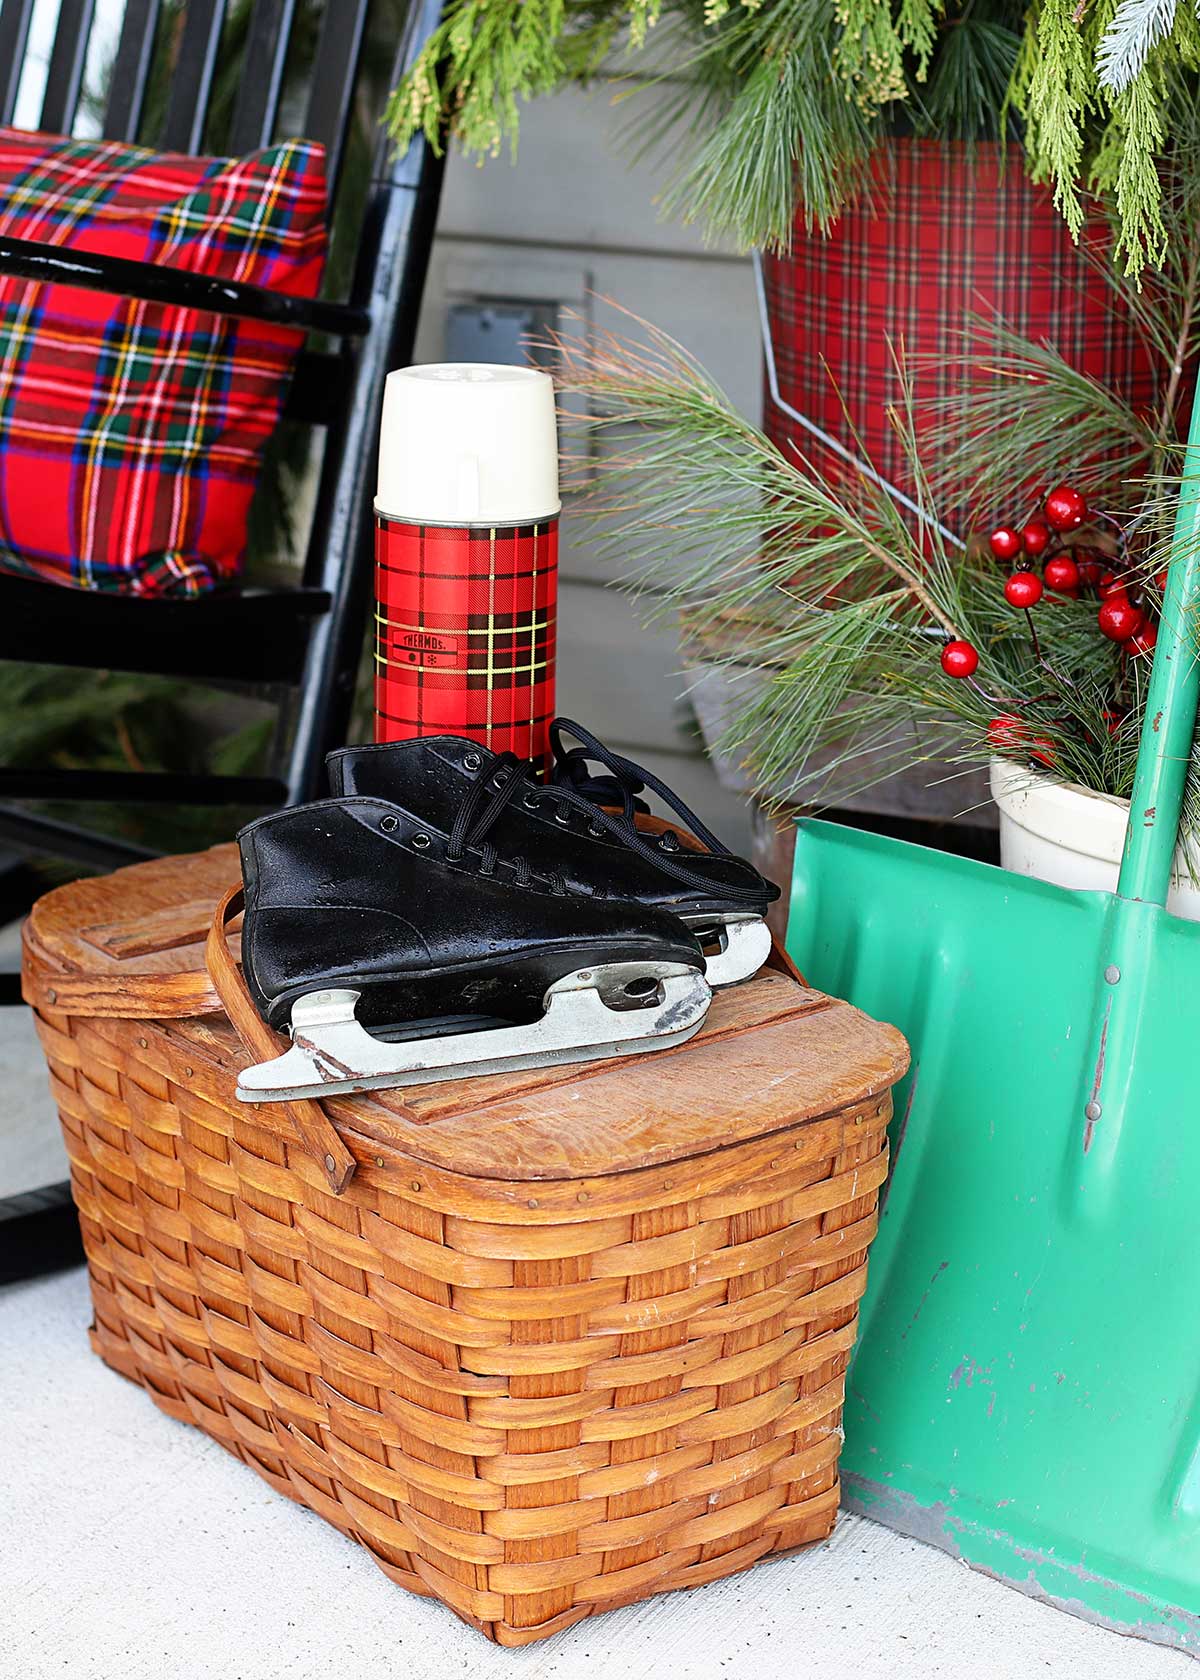 vintage picnic basket with ice skates and thermos on Christmas porch